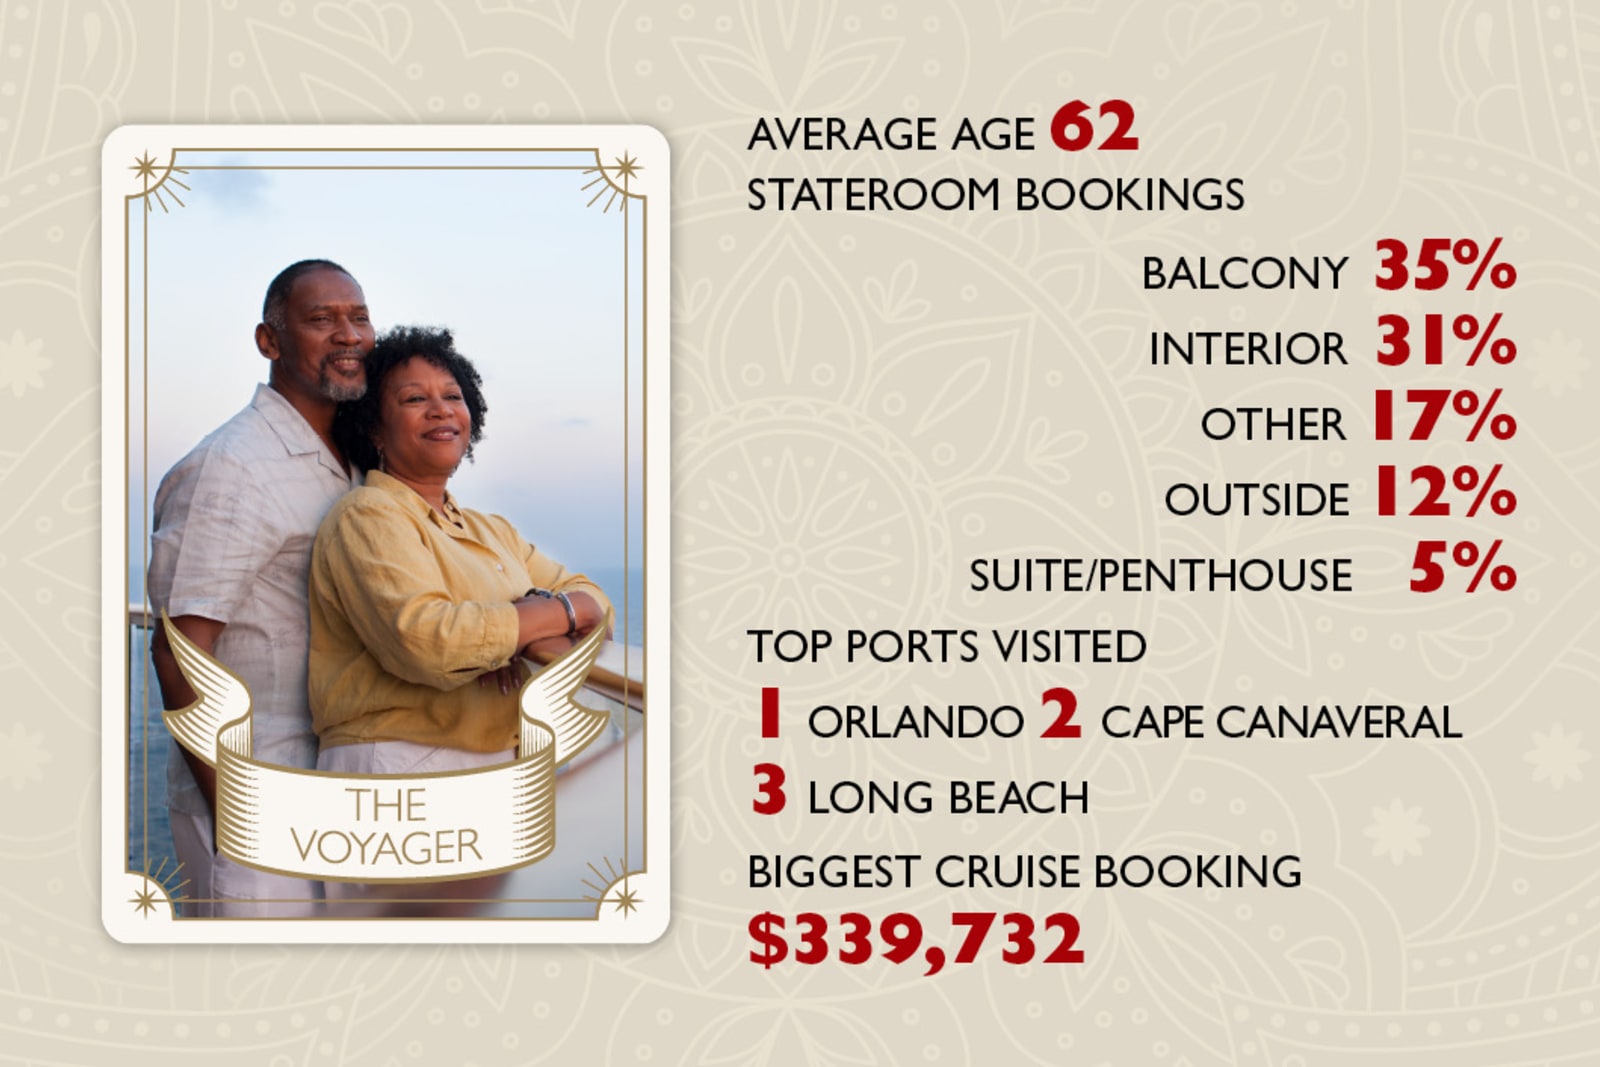 Our biggest cruise booking cost a whopping $339,732!